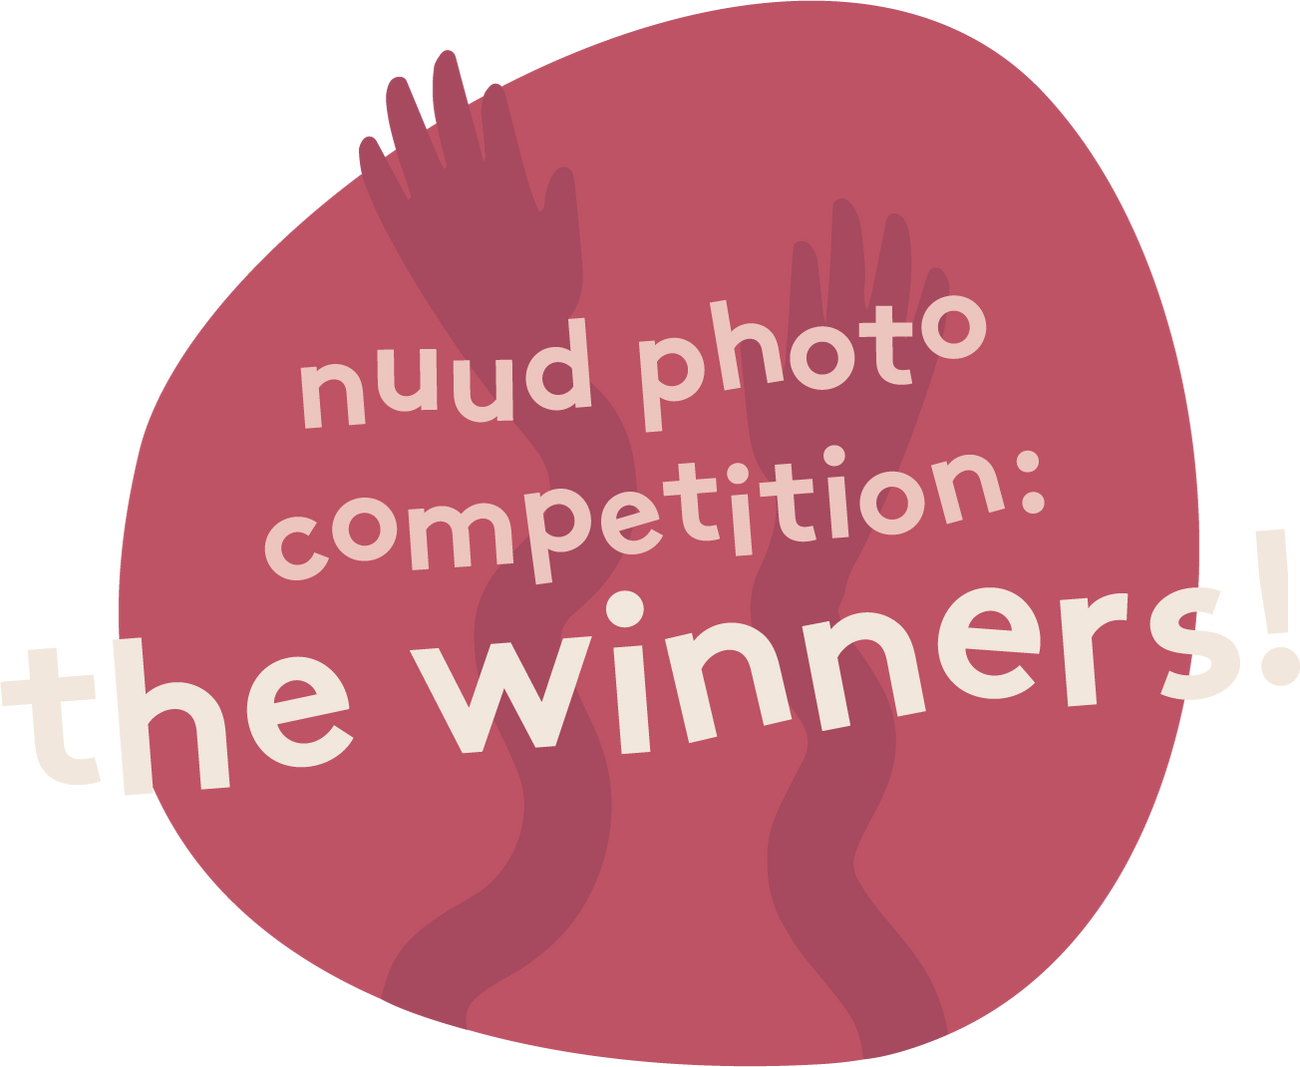 nuud photo competition: the winners!